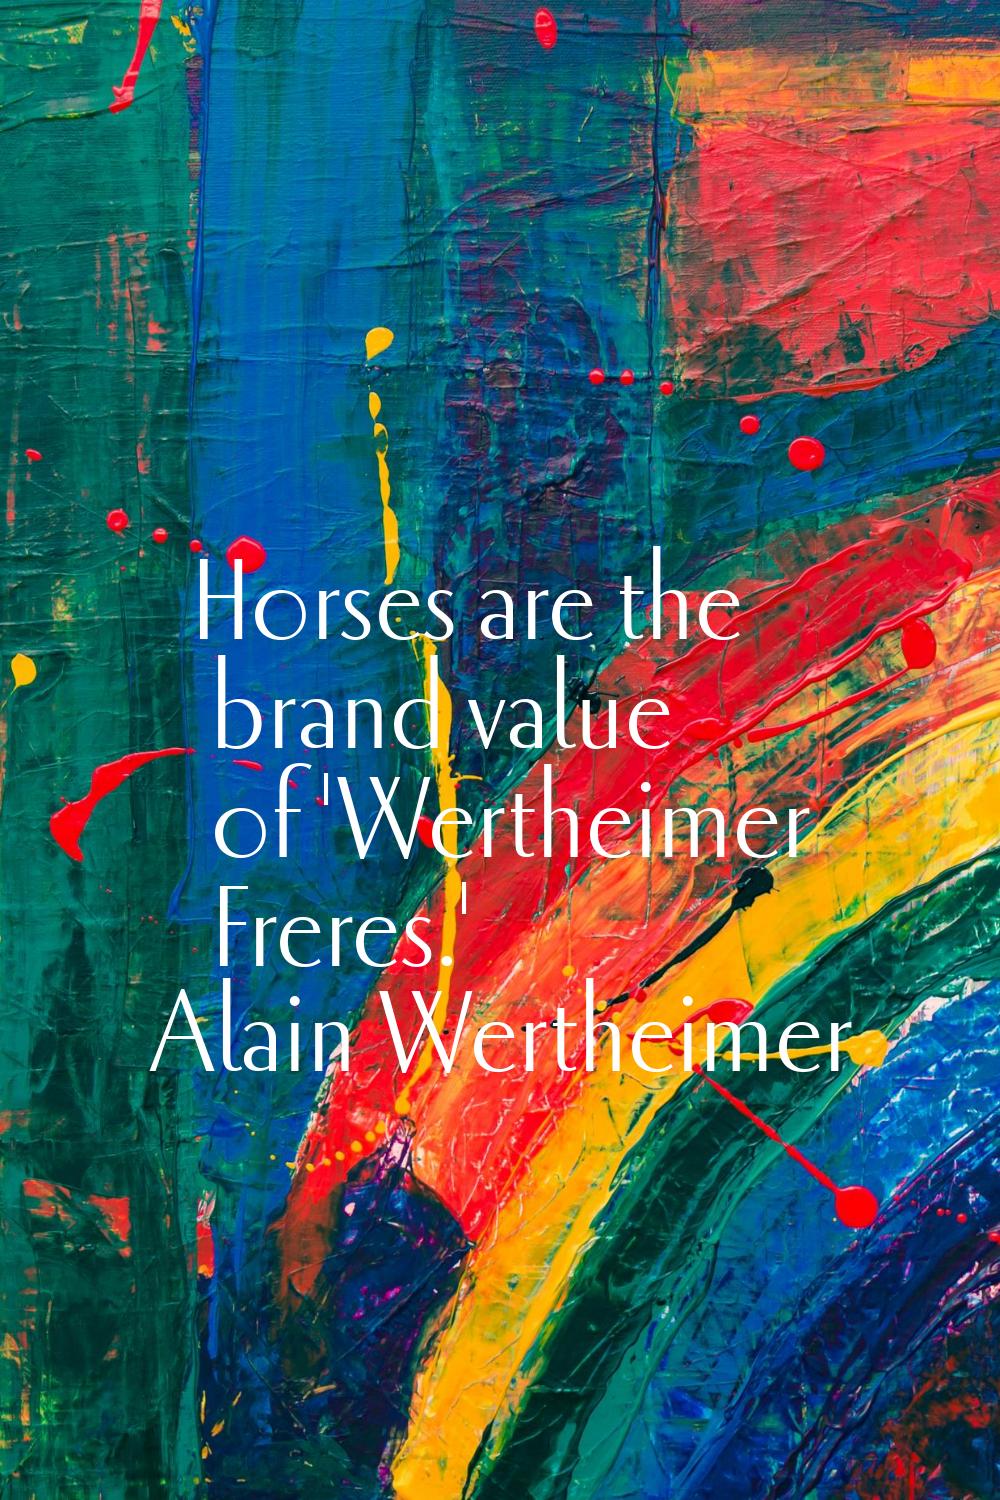 Horses are the brand value of 'Wertheimer Freres.'